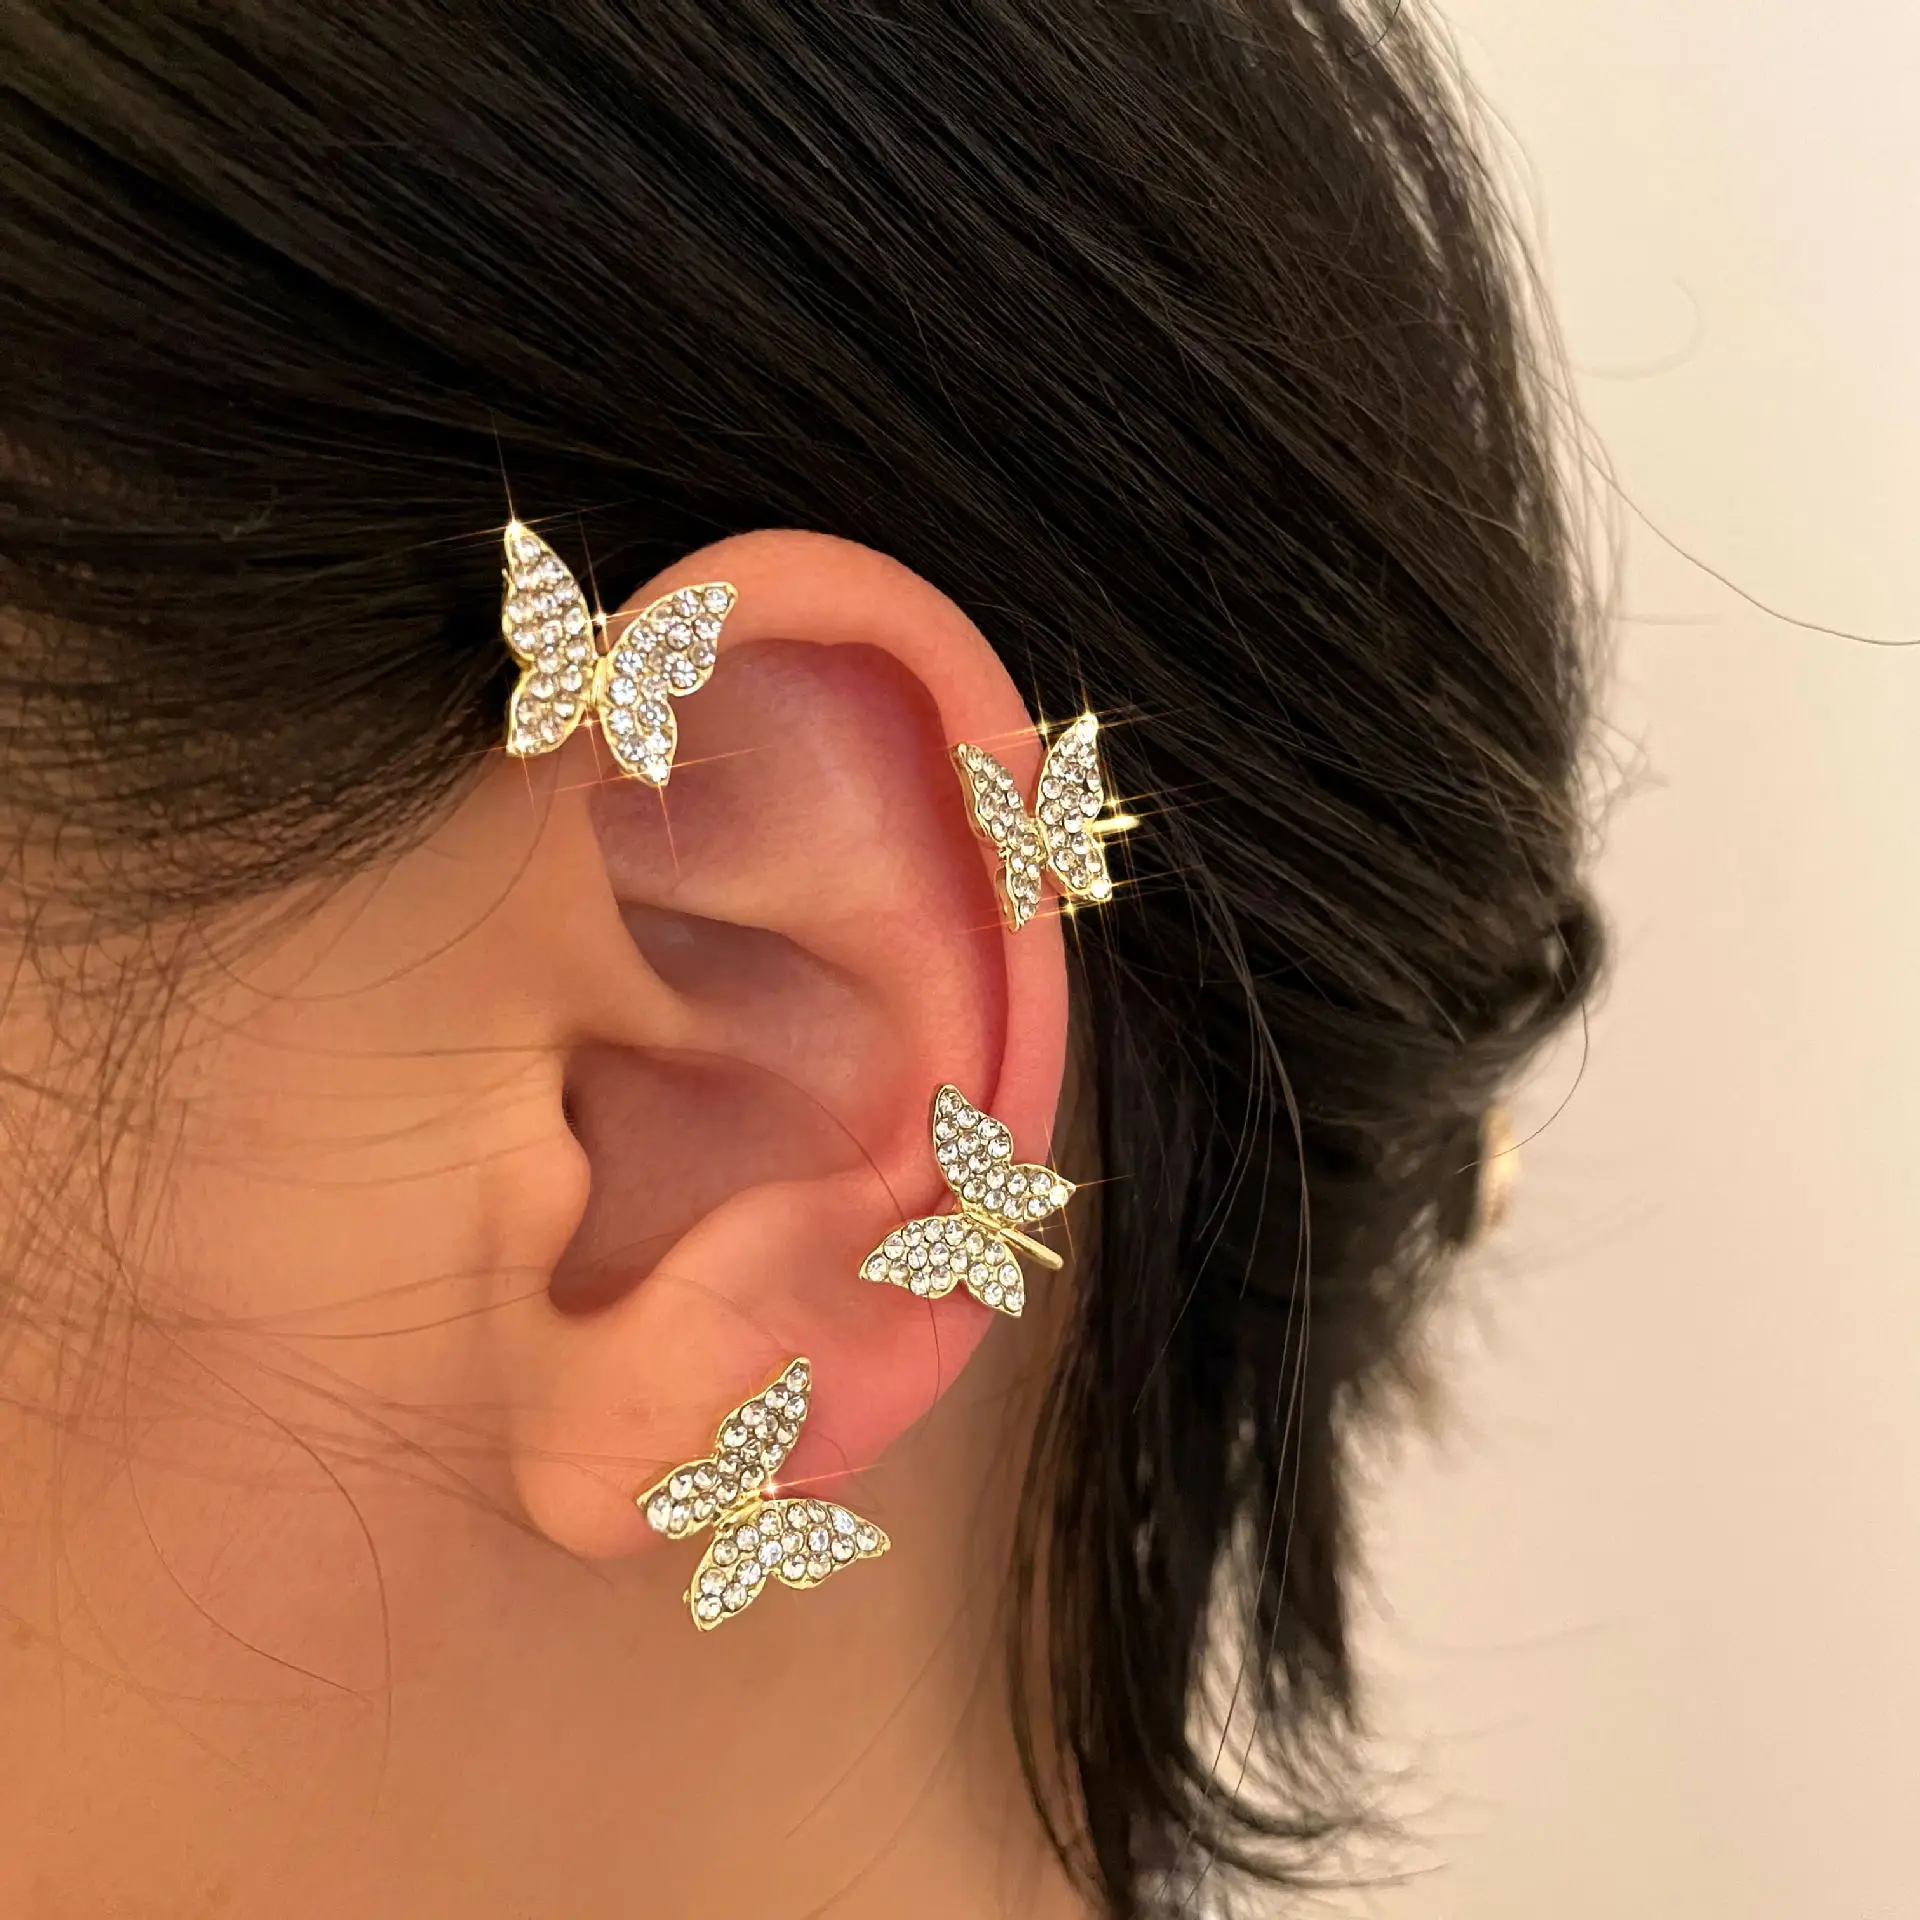 

Women Sparkling Zircon Silver Plated Metal Butterfly Ear Cuff Earrings Without Piercing For Wedding Jewelry, Picture shows